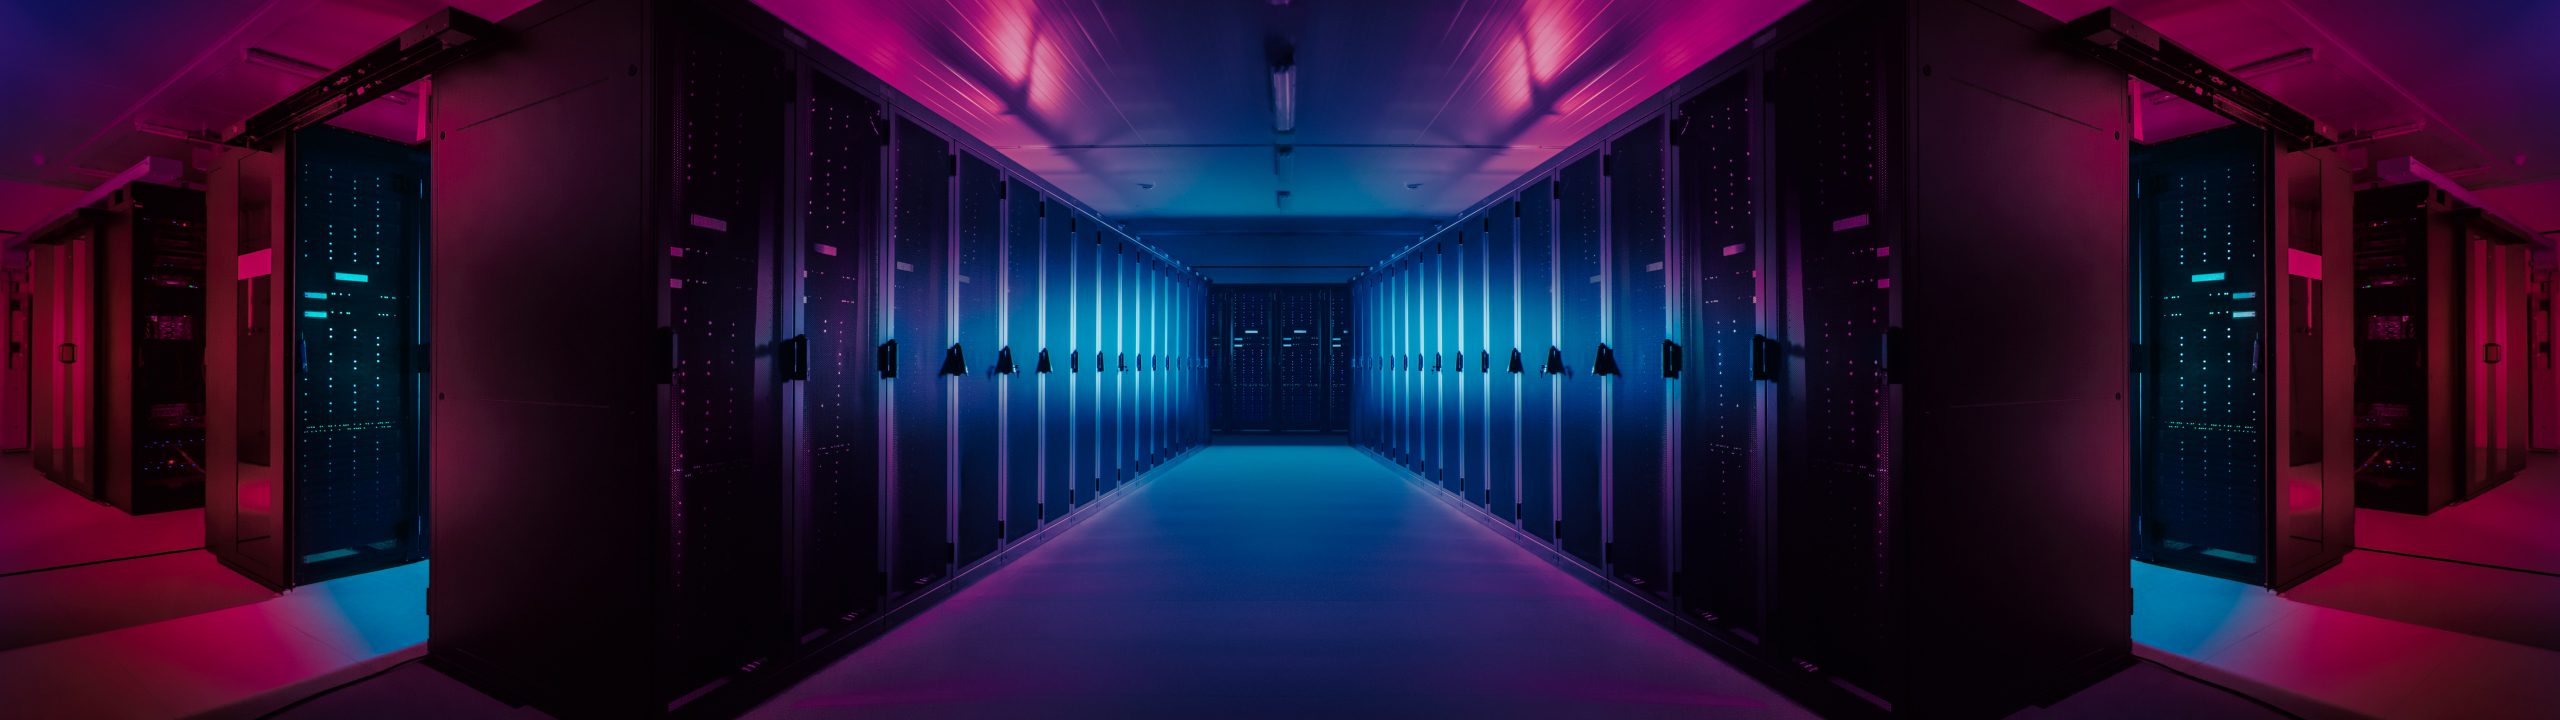 Wide-Angle Panorama Shot of a Working Data Center With Rows of Rack Servers. Red Emergency Led Lights Blinking and Computers are Working. Dark Ambient Light.